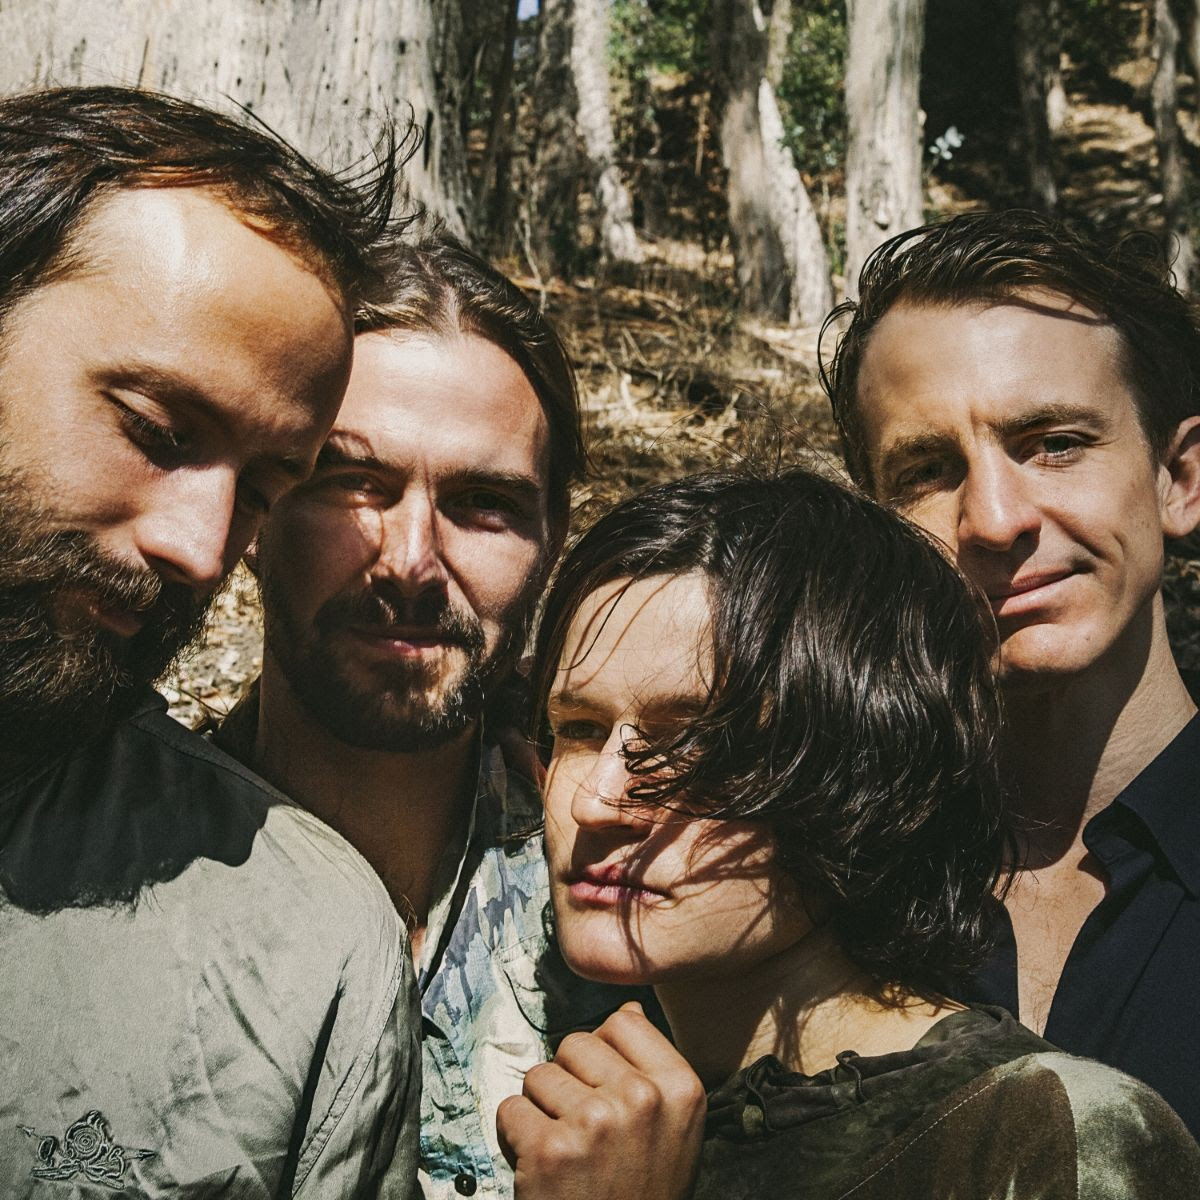 Big Thief Announce New Album <i></noscript>Two Hands</i>, Release “Not”” title=”Big Thief Two Hands Album Not Song Listen” data-original-id=”338736″ data-adjusted-id=”338736″ class=”sm_size_full_width sm_alignment_center ” data-image-use=”multiple_use” data-image-source=”video_screenshot” />
<p>1. Rock And Sing<br />
2. Forgotten Eyes<br />
3. The Toy<br />
4. Two Hands<br />
5. Those Girls<br />
6. Shoulders<br />
7. Not<br />
8. Wolf<br />
9. Replaced<br />
10. Cut My Hair</p>
</div>
</div>
</div>
</div>
</div>
</section>
<section data-particle_enable=